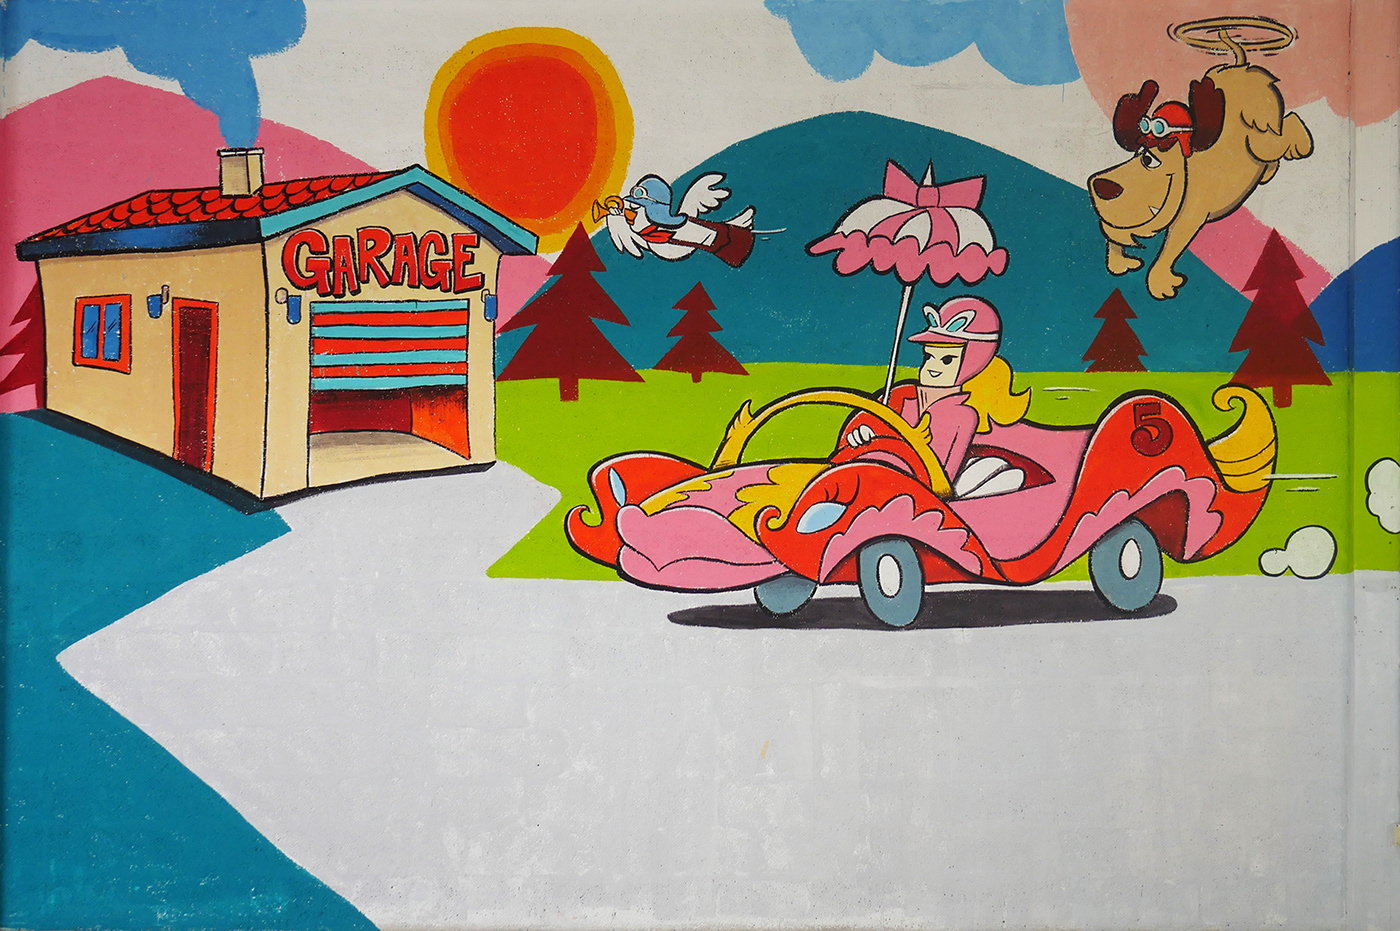 waky races Penelope Pitstop dick dustardly and the muttley slag brothers officina garage murale Murals